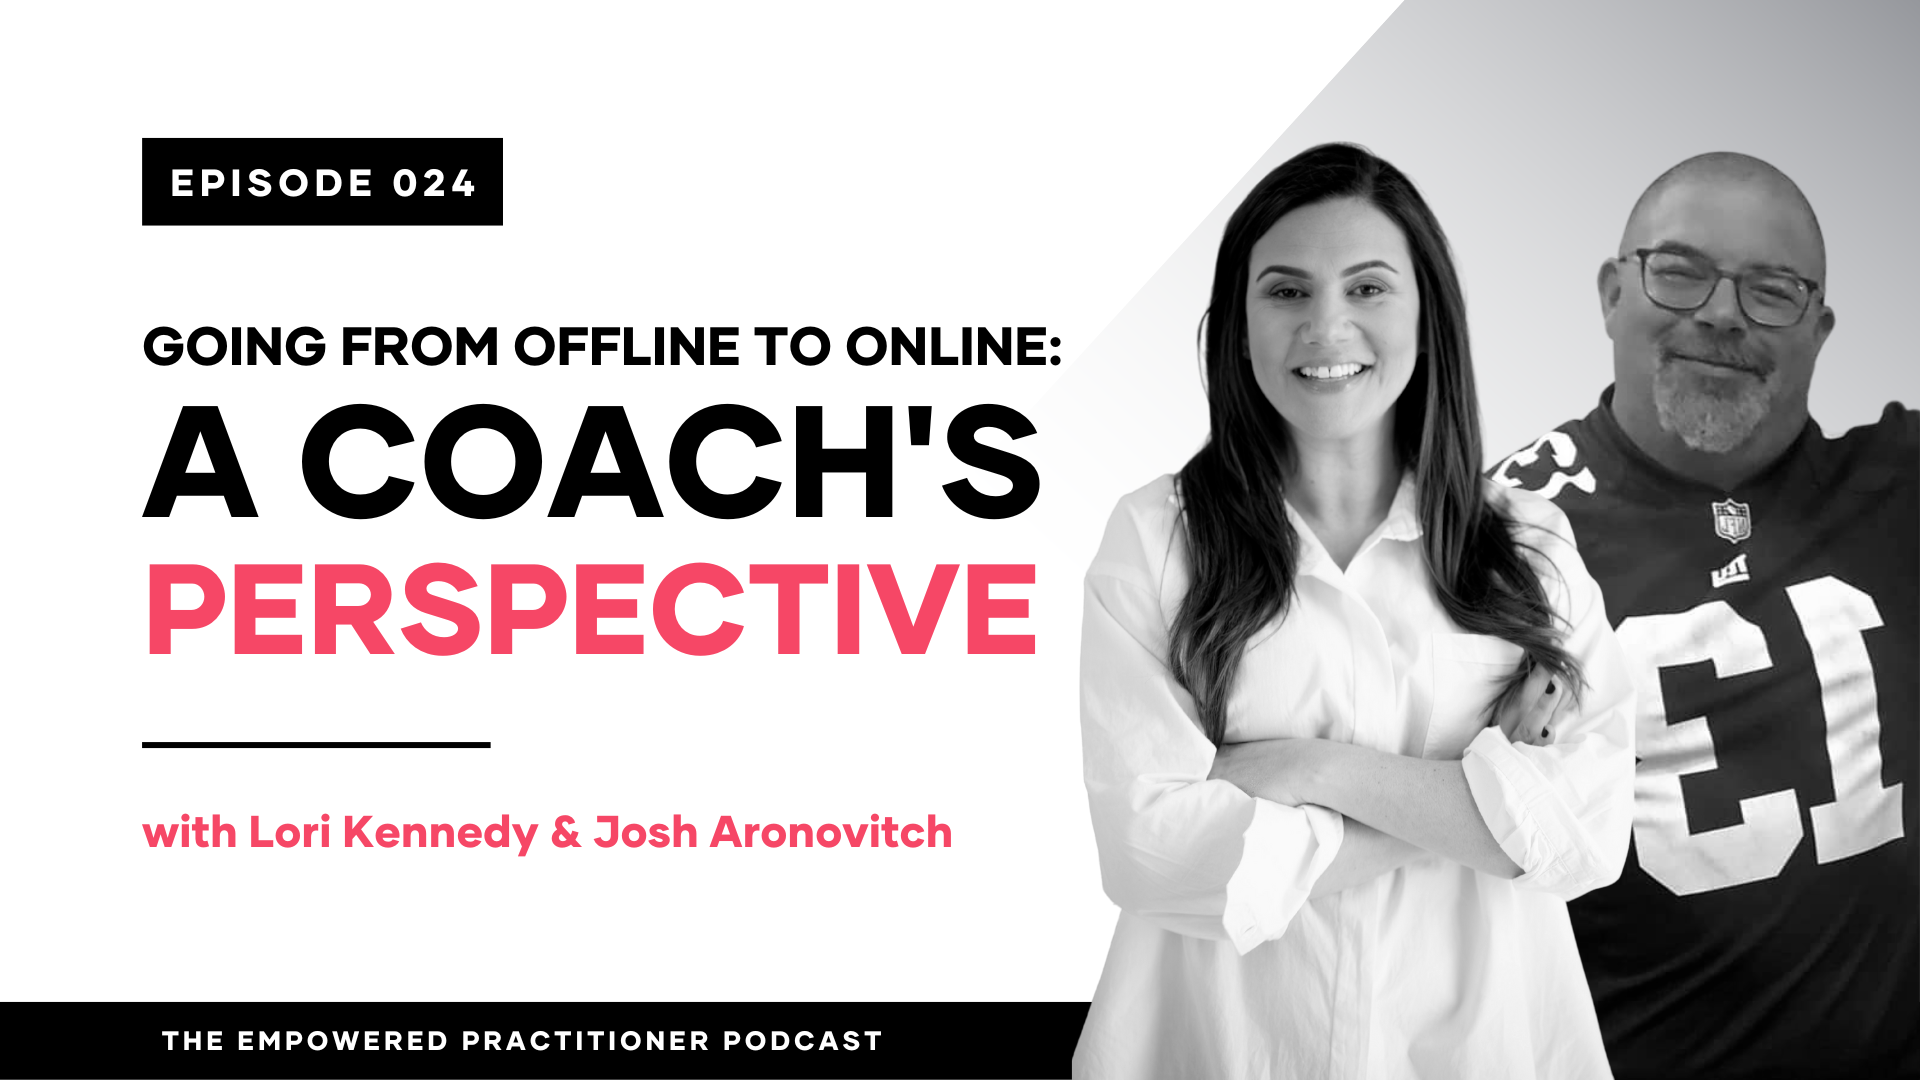 GOING FROM OFFLINE TO ONLINE - A COACH’S PERSPECTIVE